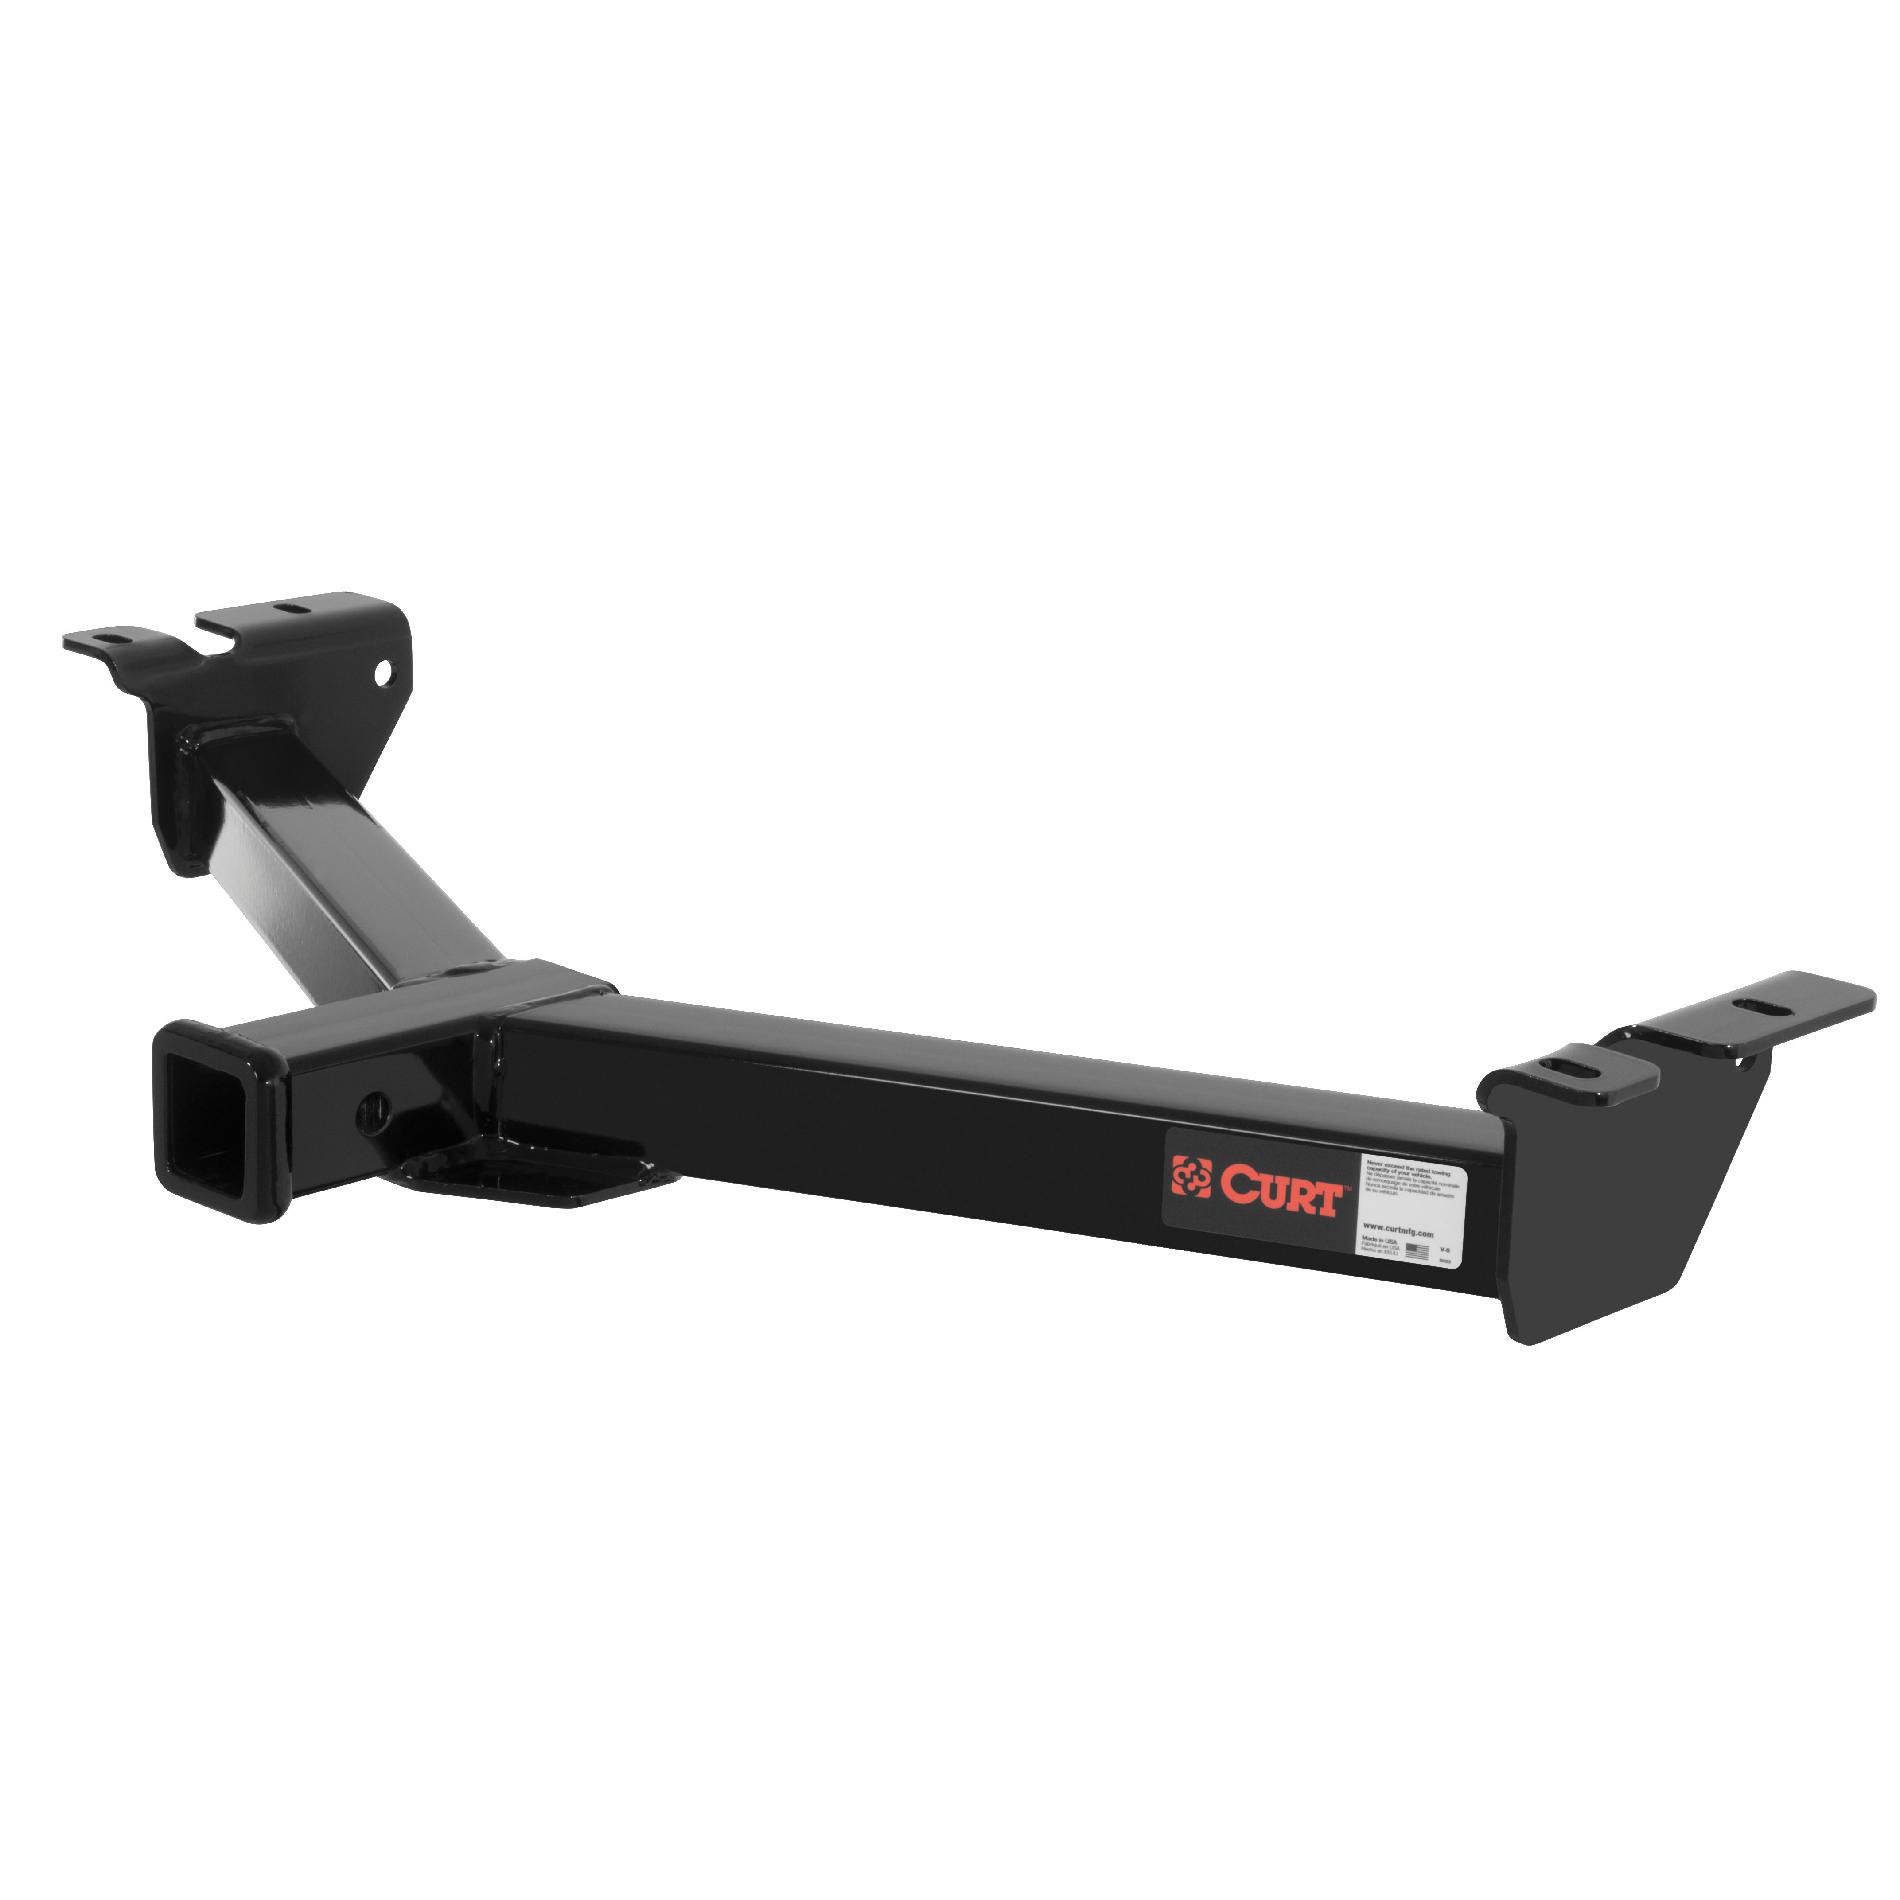 Hitch for 2008-10 Ford E-Series